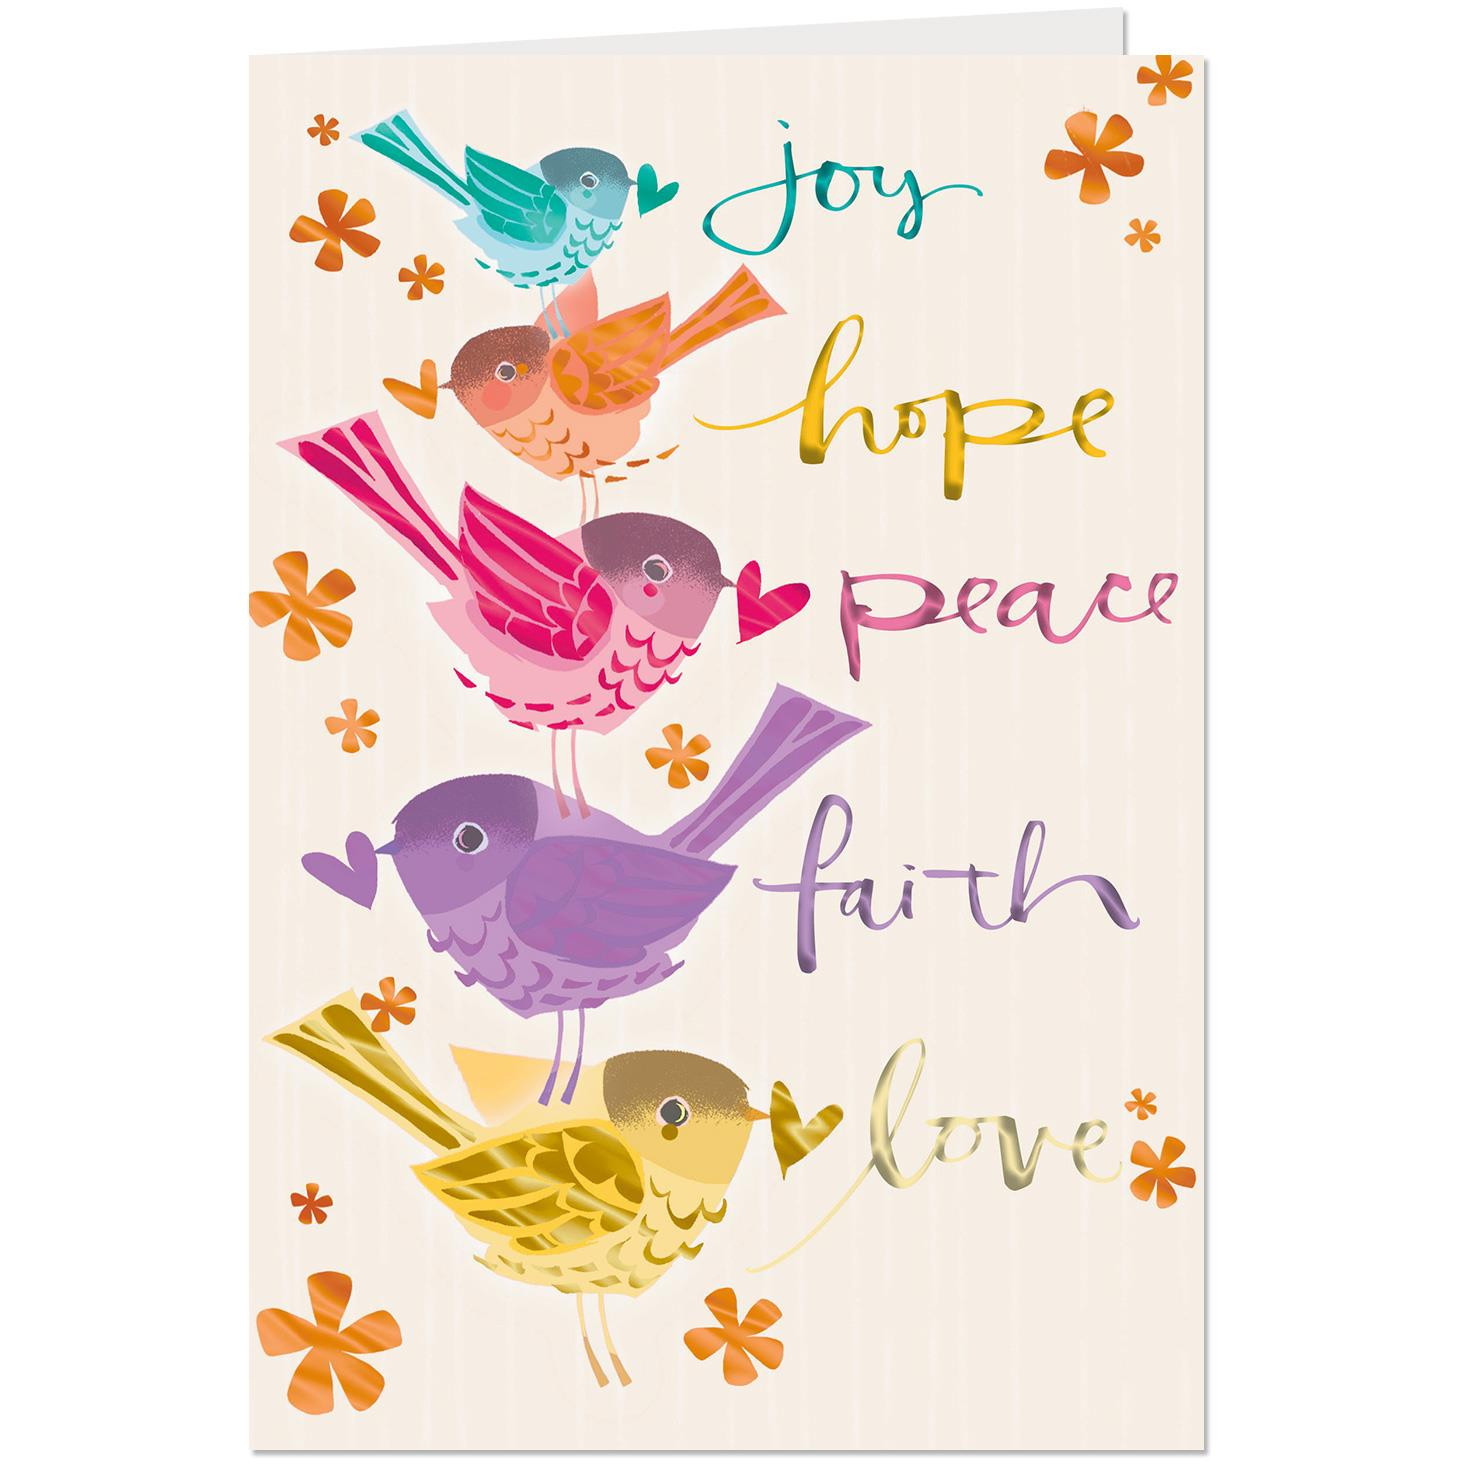 Birthday Cards Pictures
 Joy Hope Peace Religious Birthday Card Greeting Cards